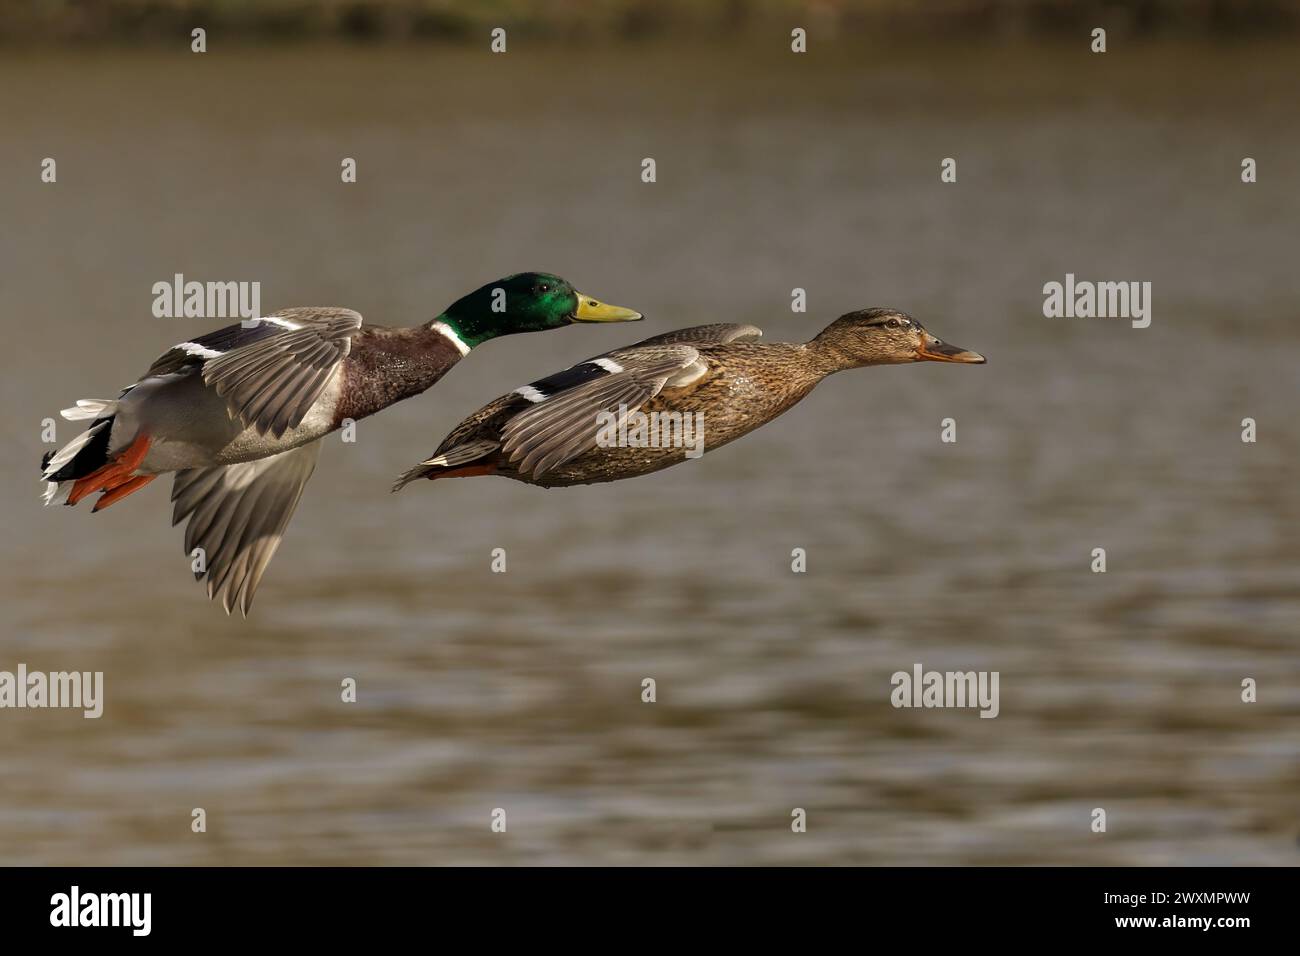 The two mallard ducks flying above the water Stock Photo